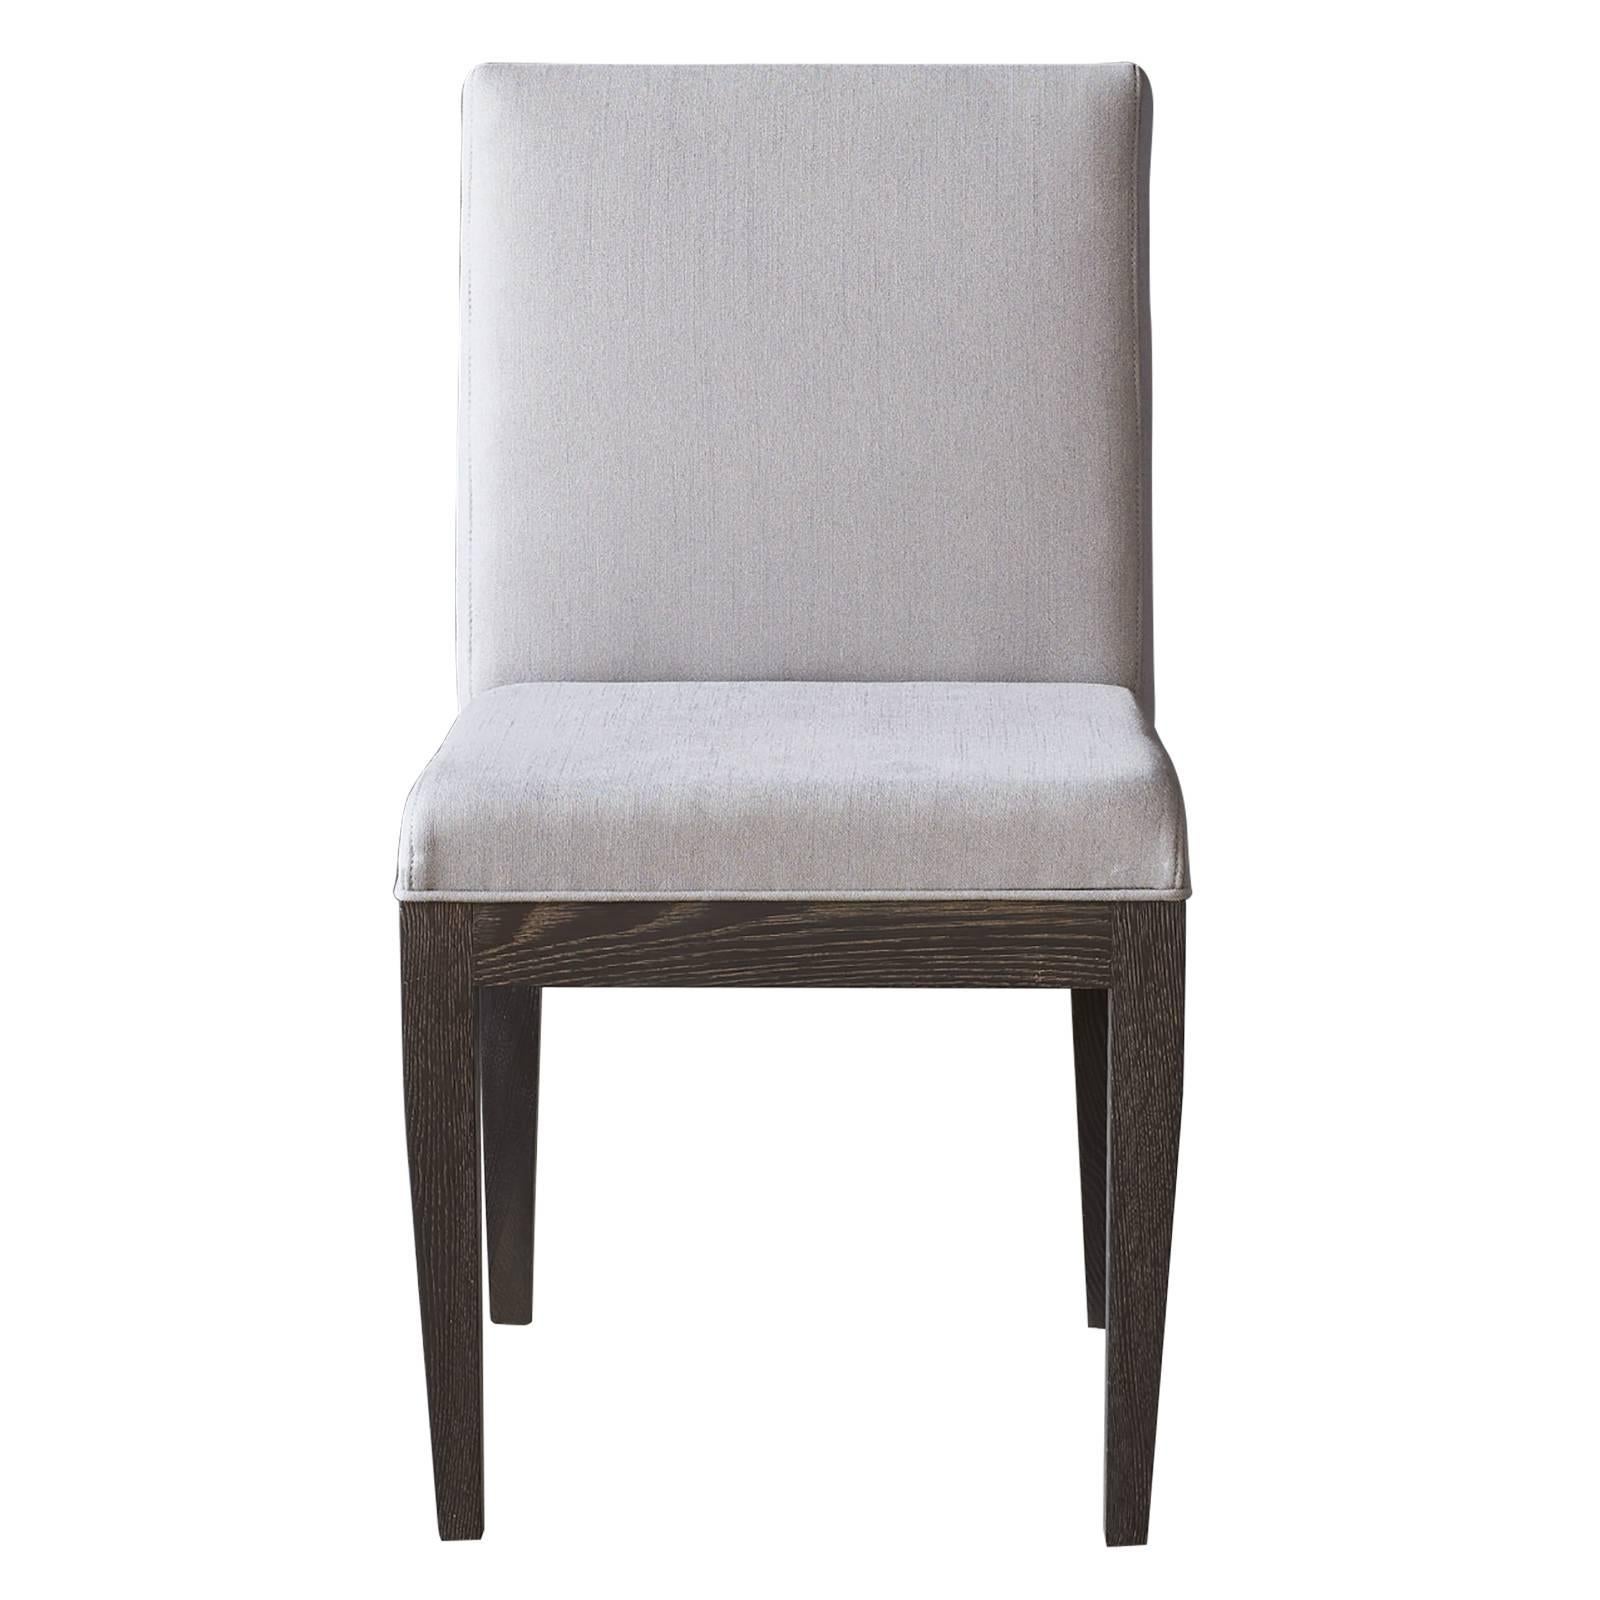 Bedford Upholstered Chair For Sale